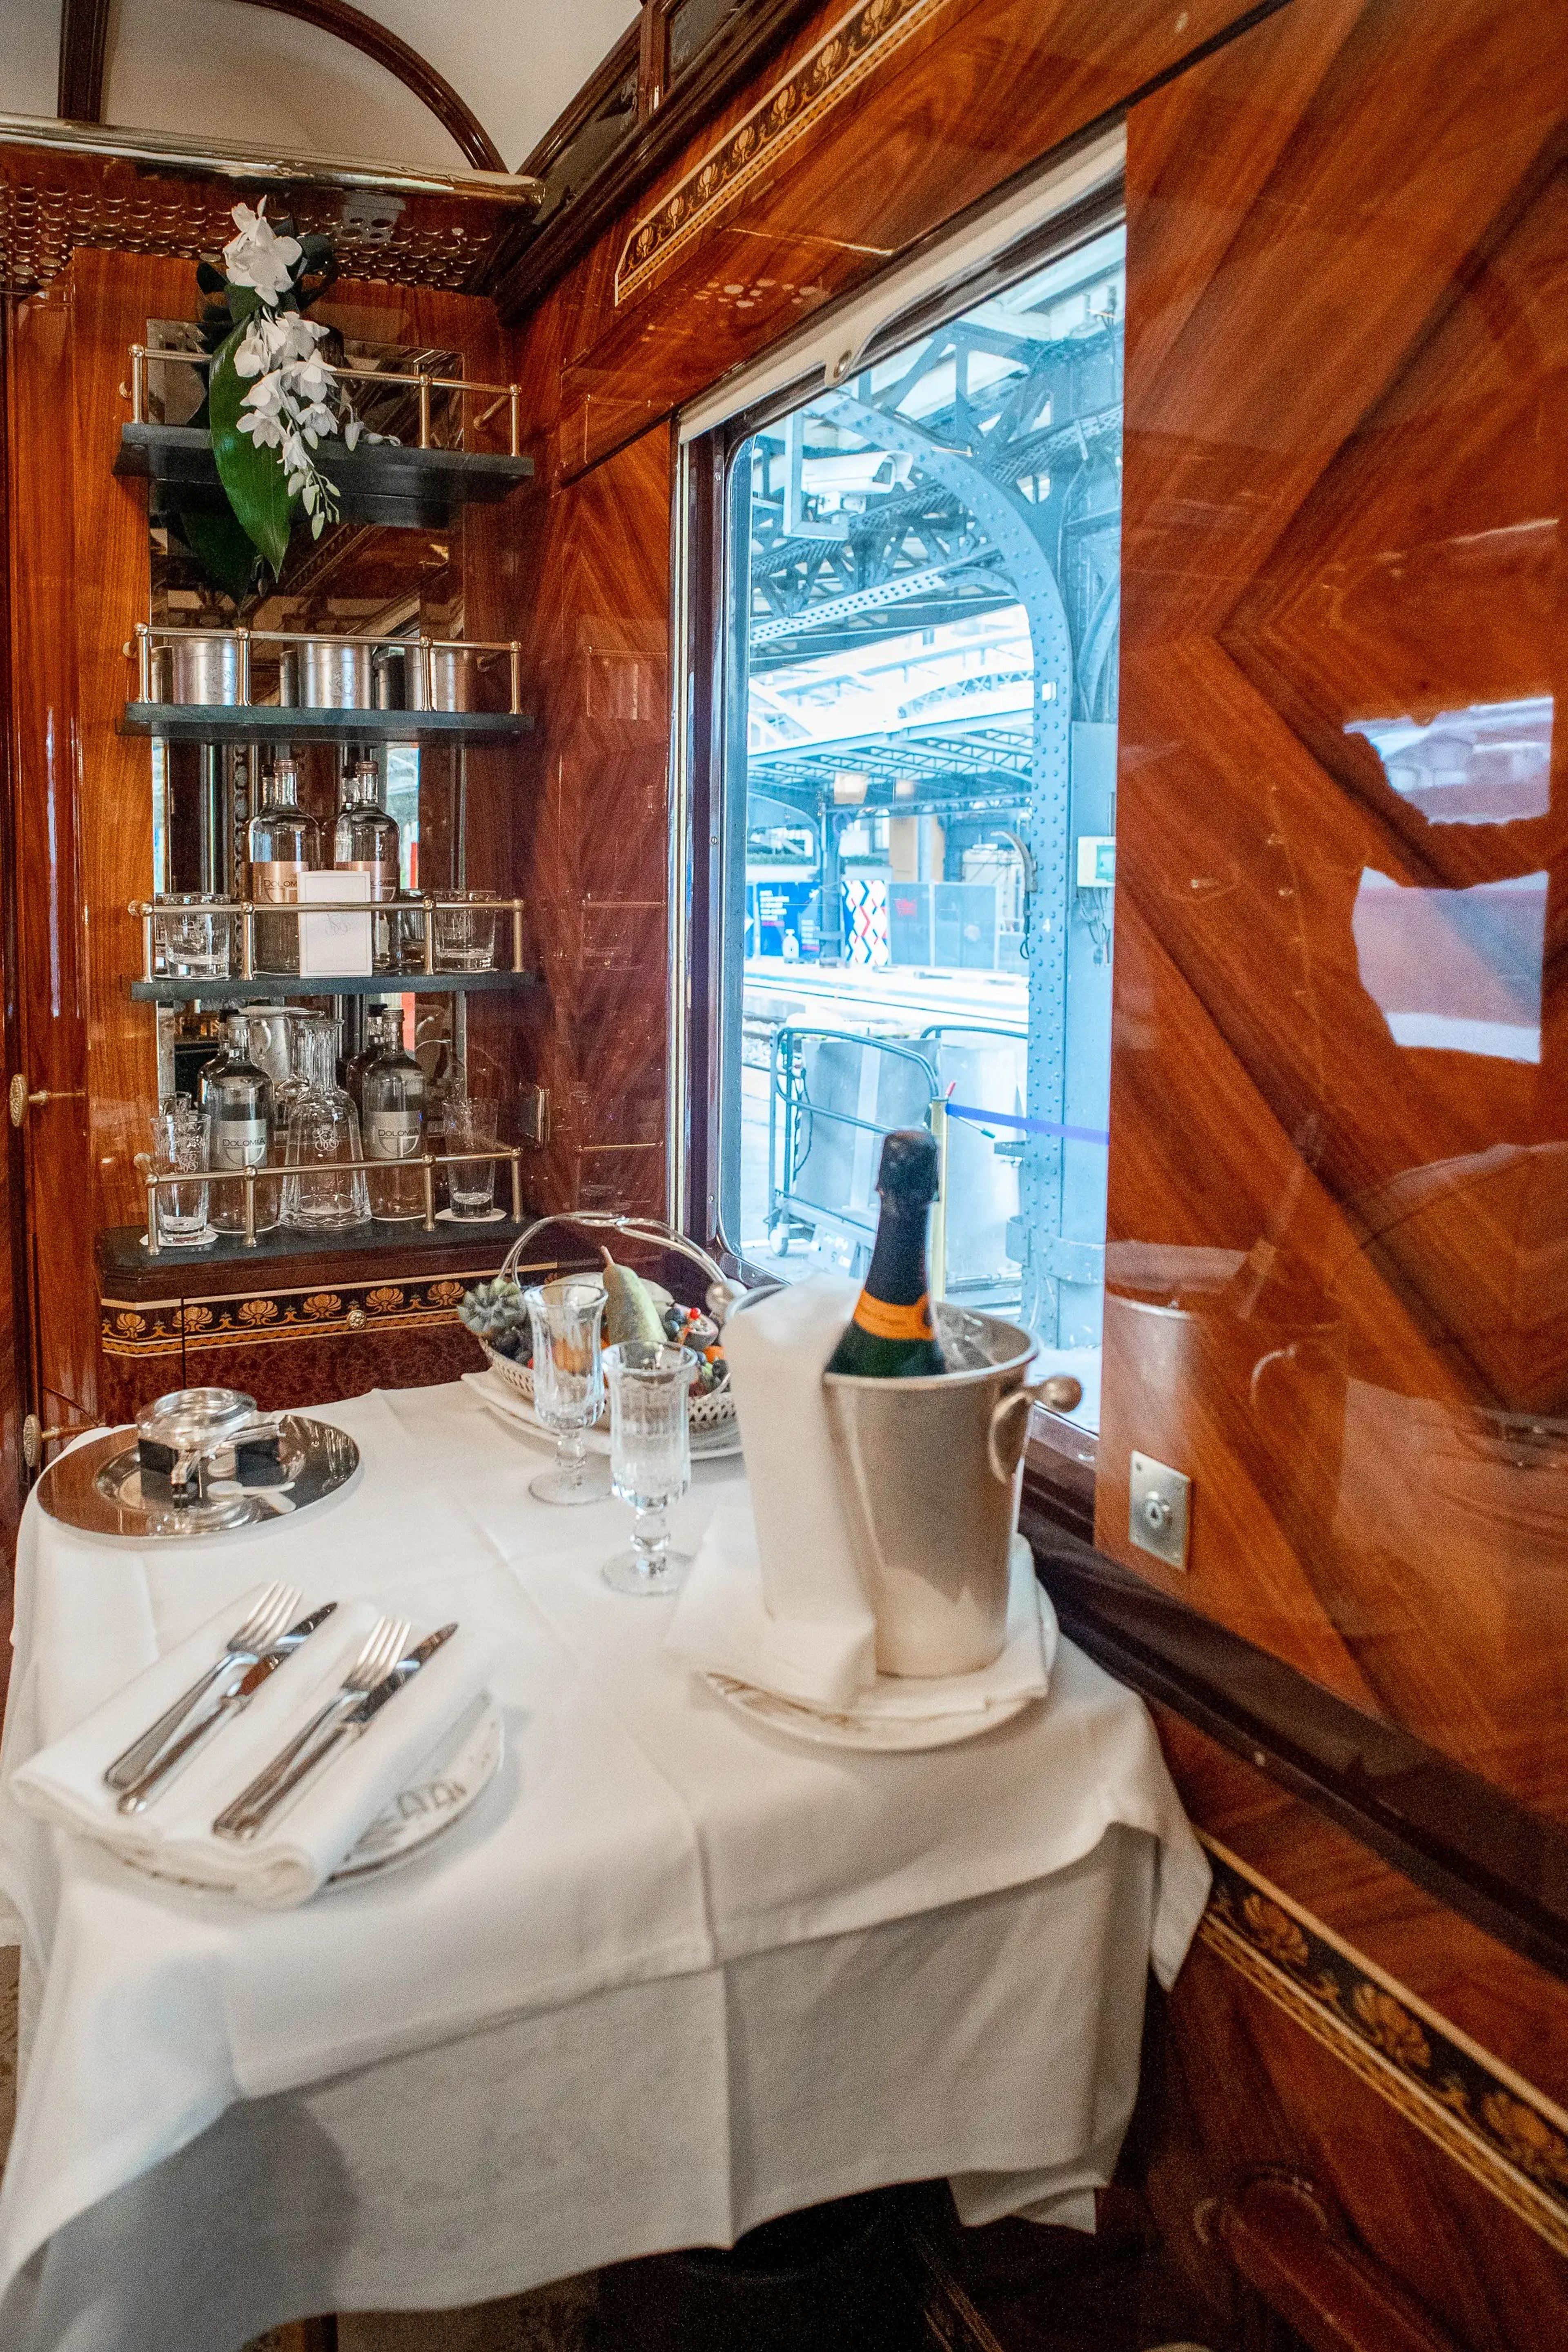 dining table with a white cloth and champagne in front of a bar against the wall in a wood-walled train cabin